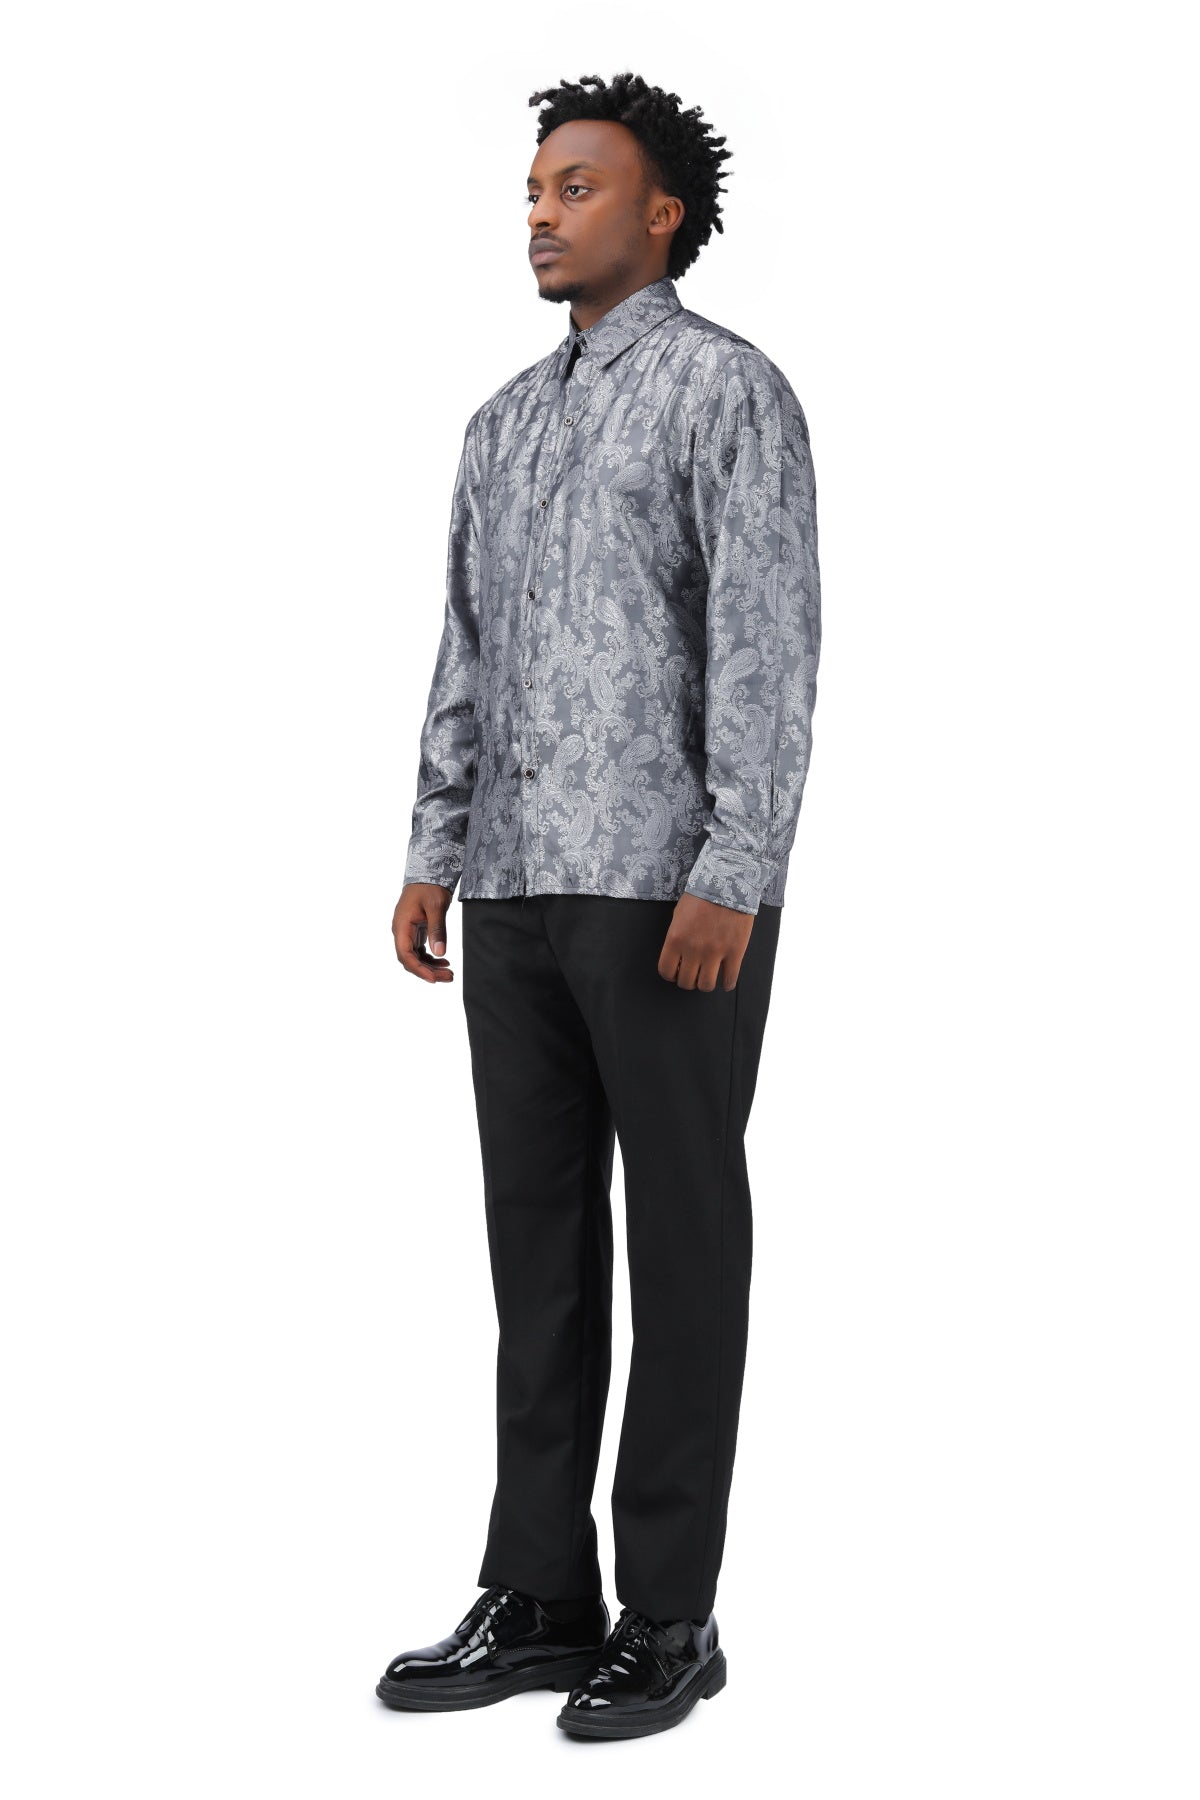 Slim Fit Embroidered Grey Paisley Shirt